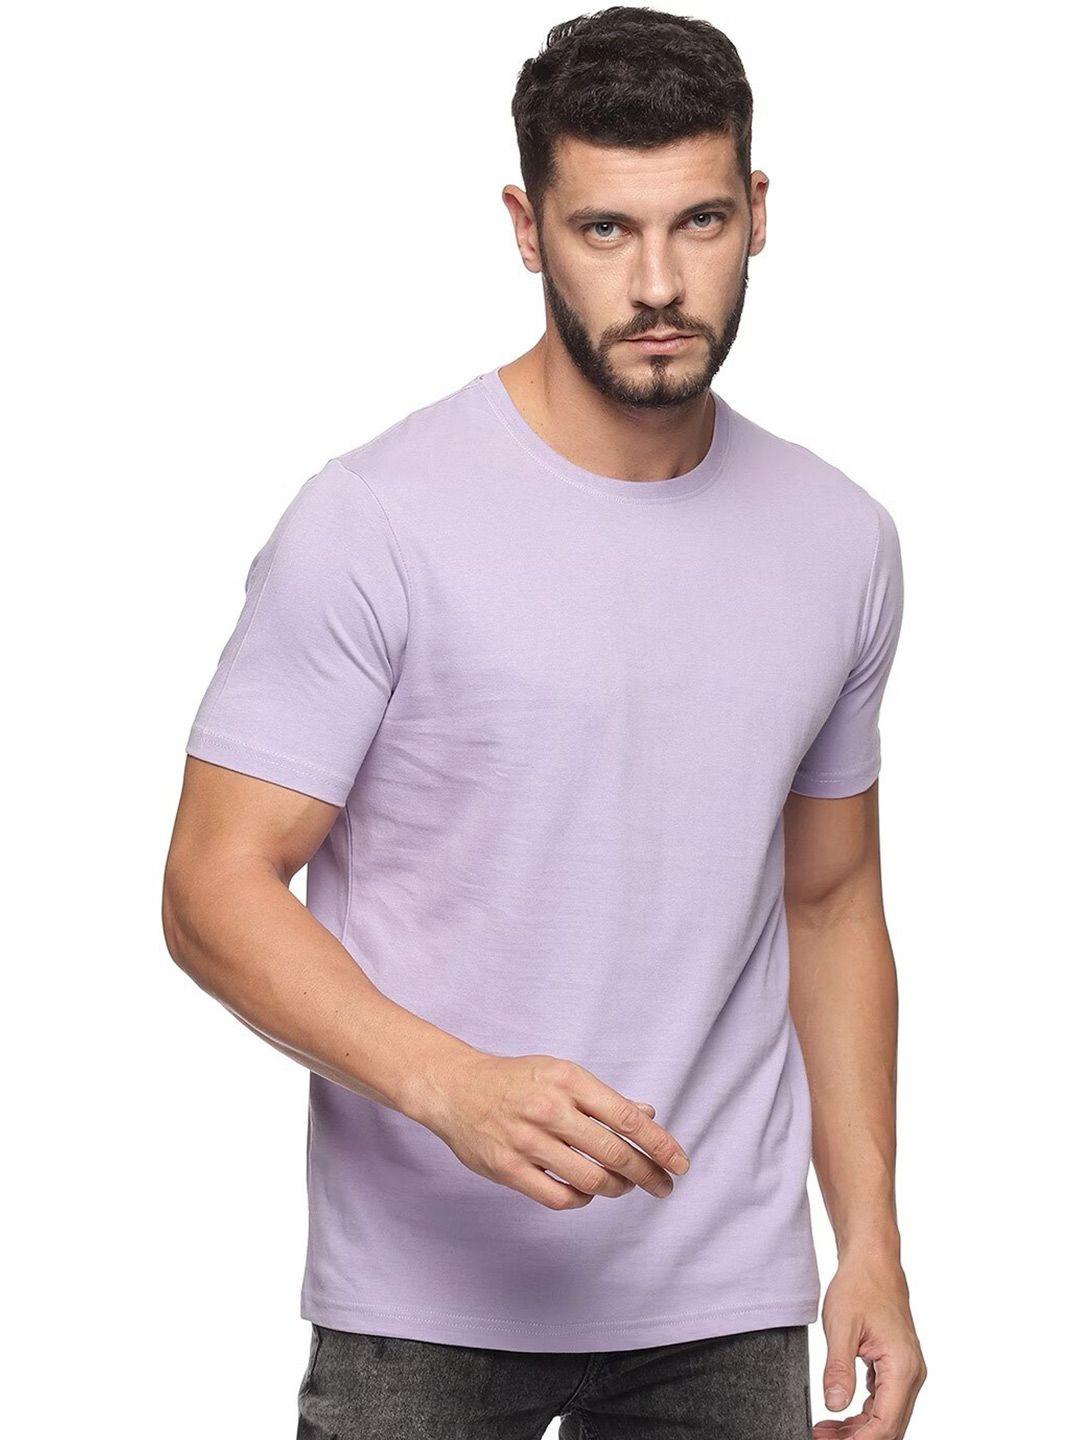 the hollander round neck short sleeves pure cotton t-shirt